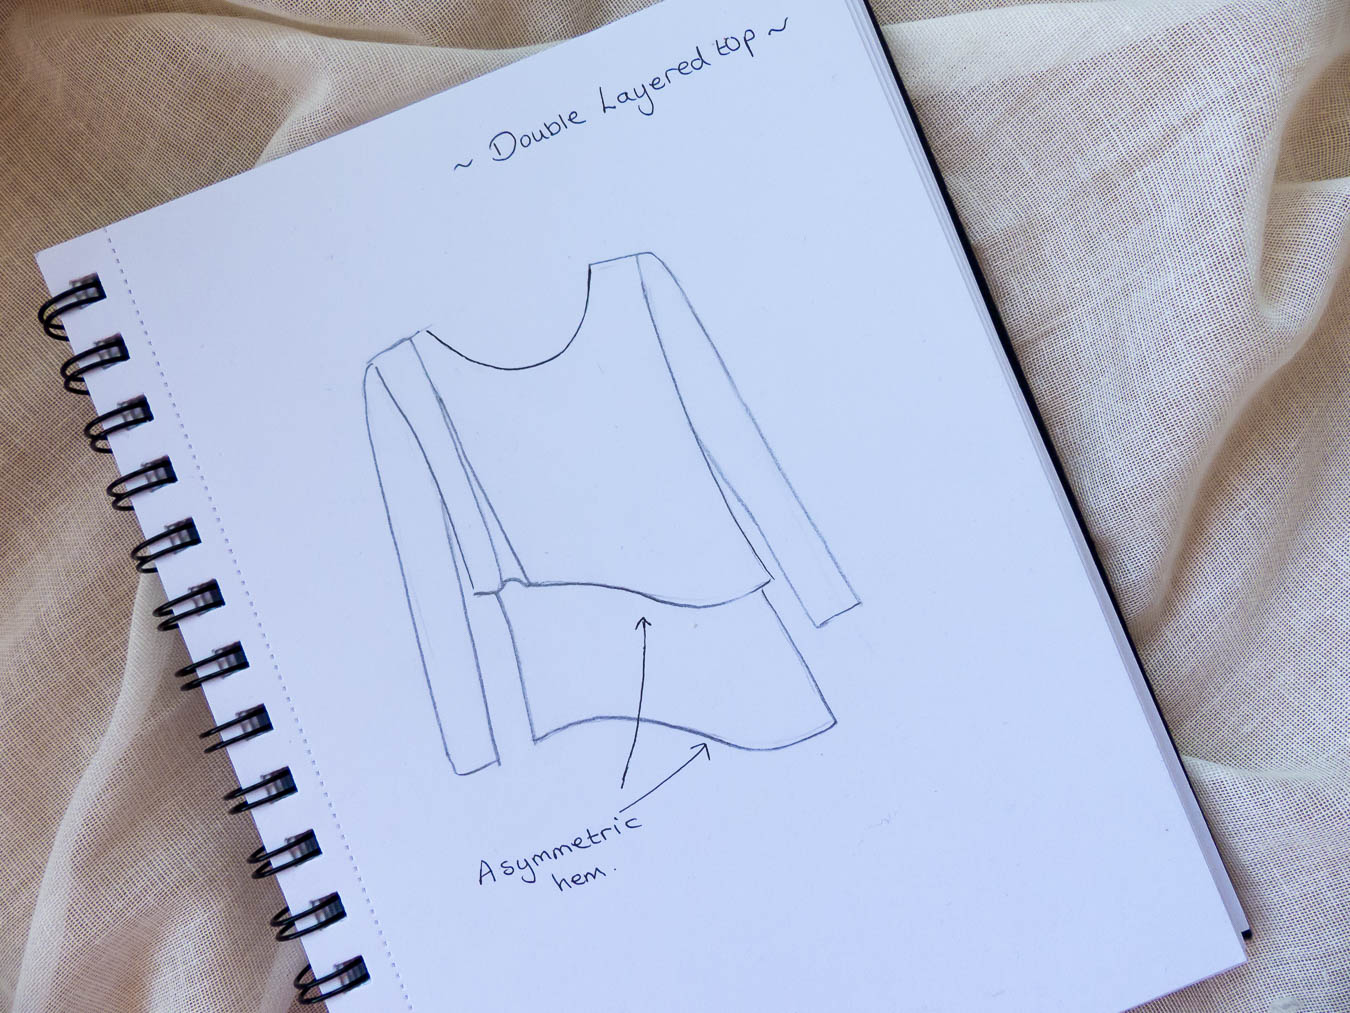 Sketch of DIY double layered top